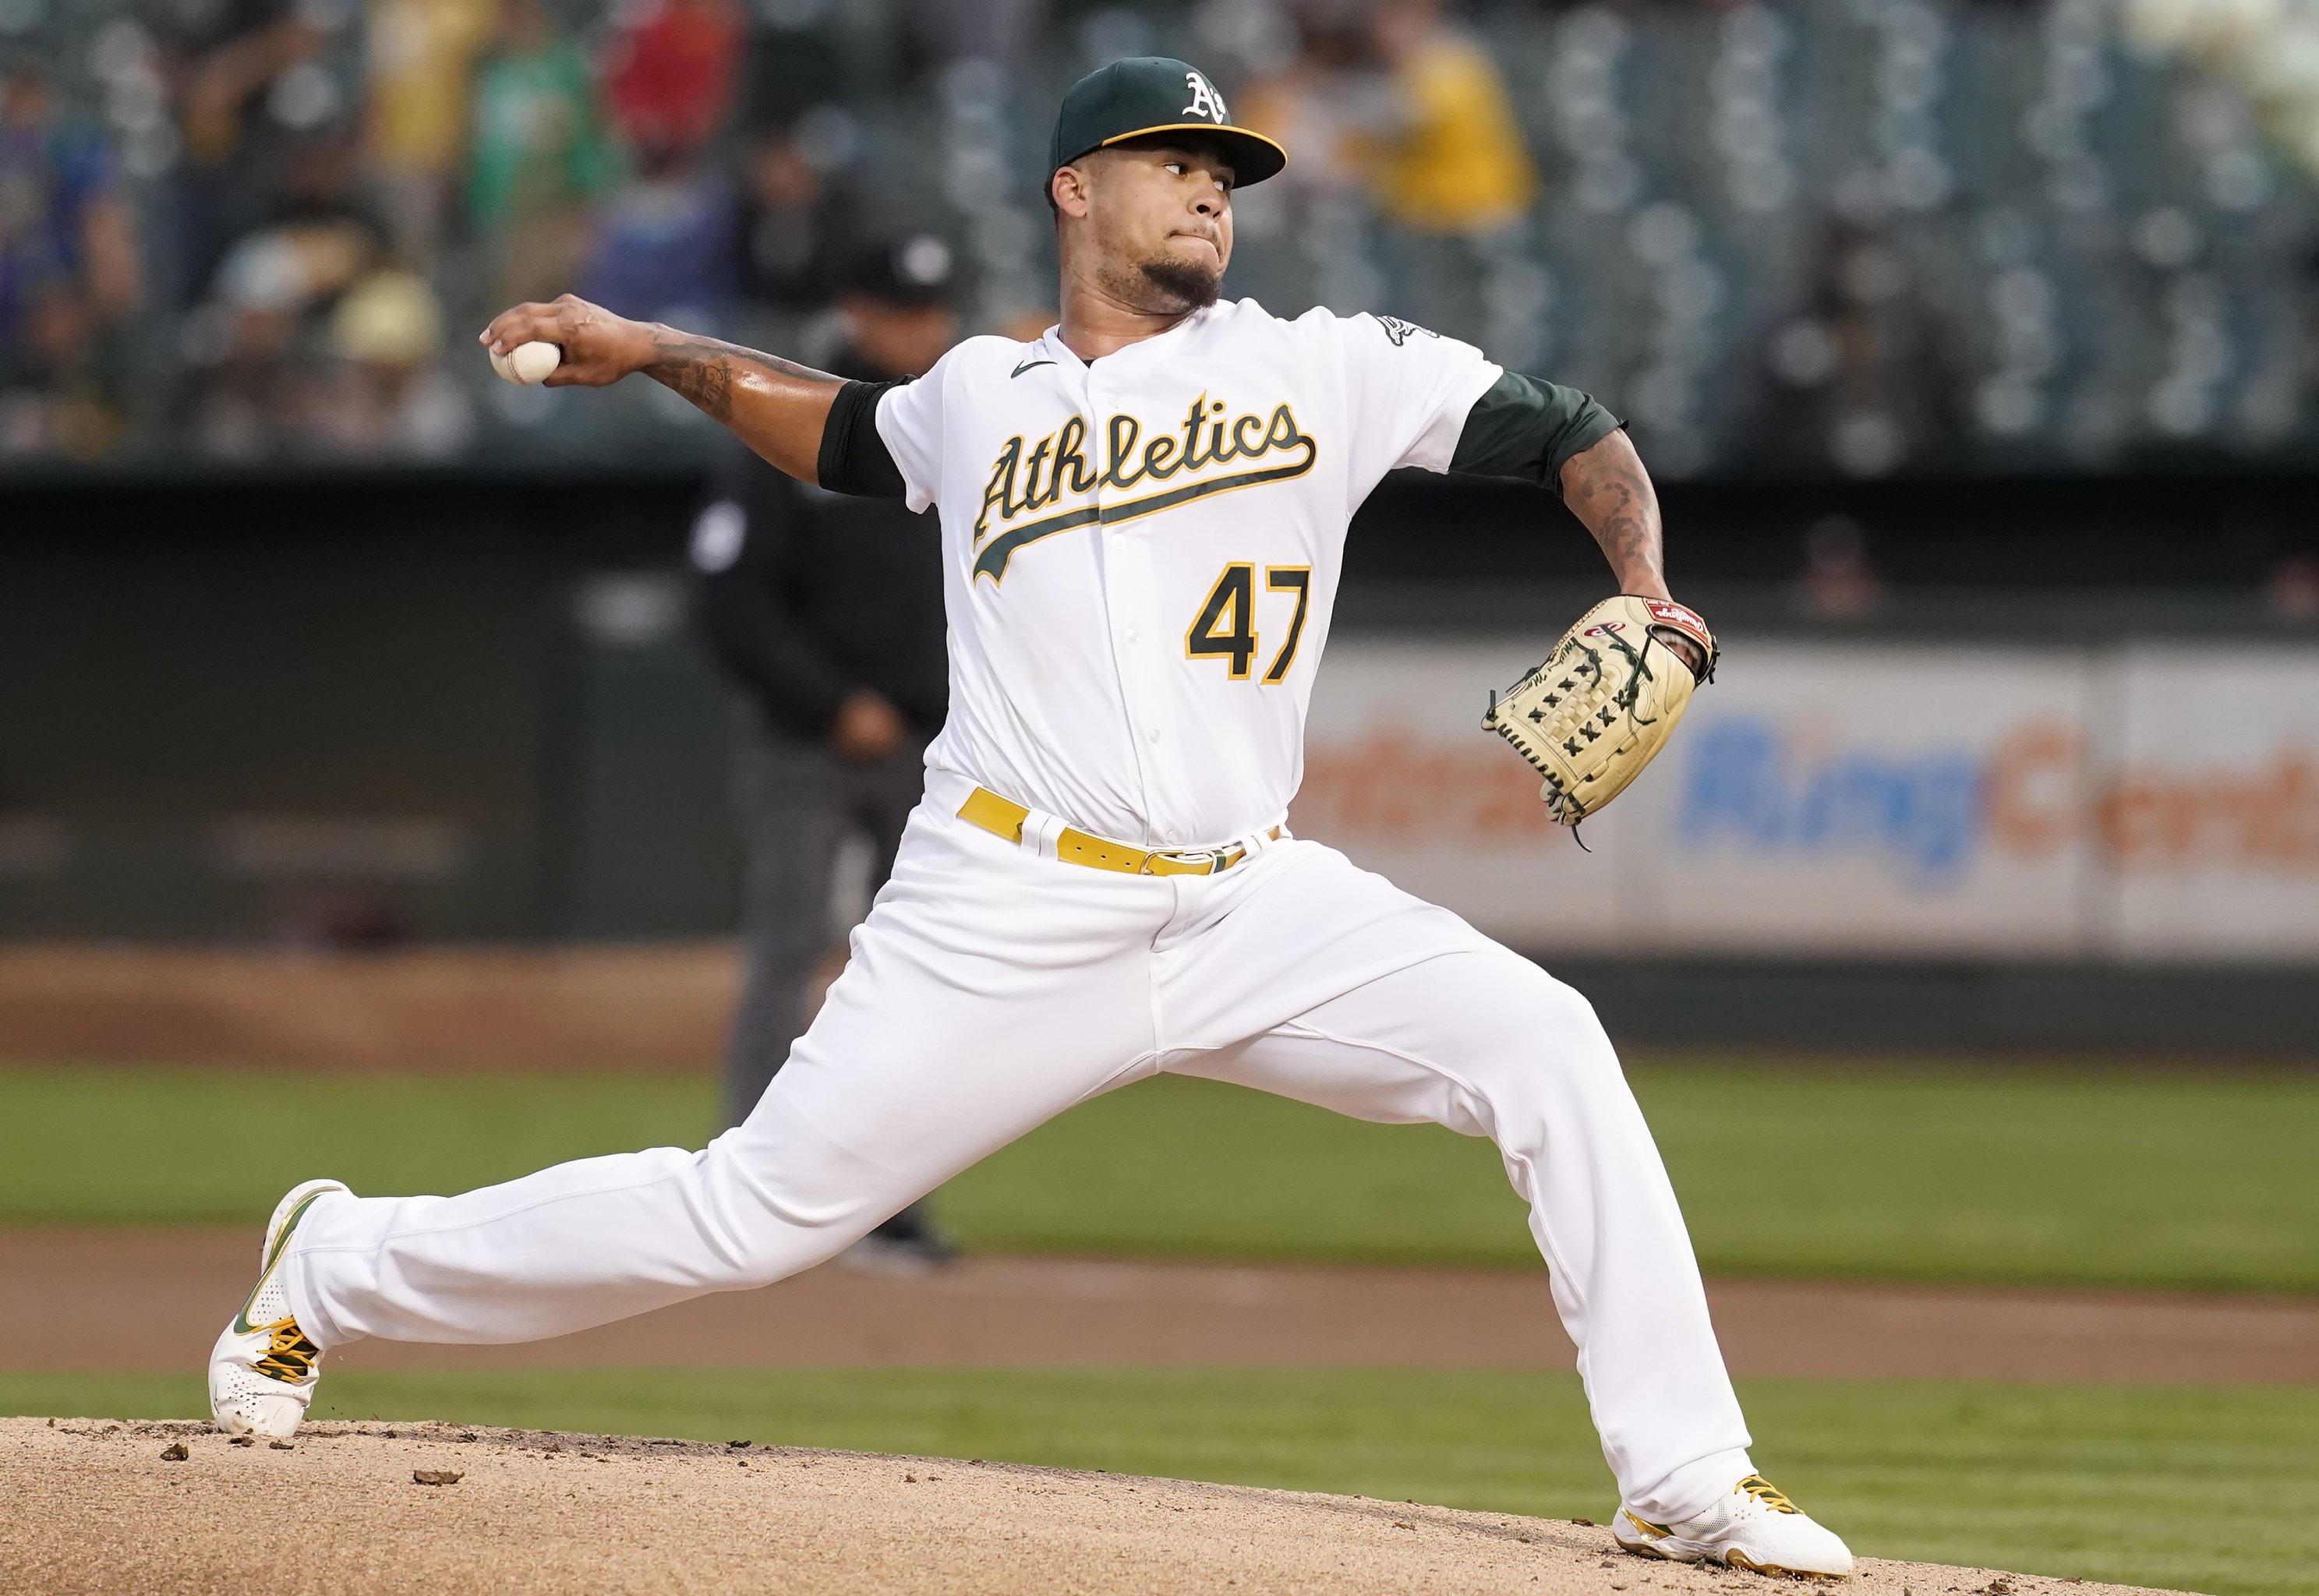 Yankees acquire RHPs Frankie Montas, Lou Trivino from A's